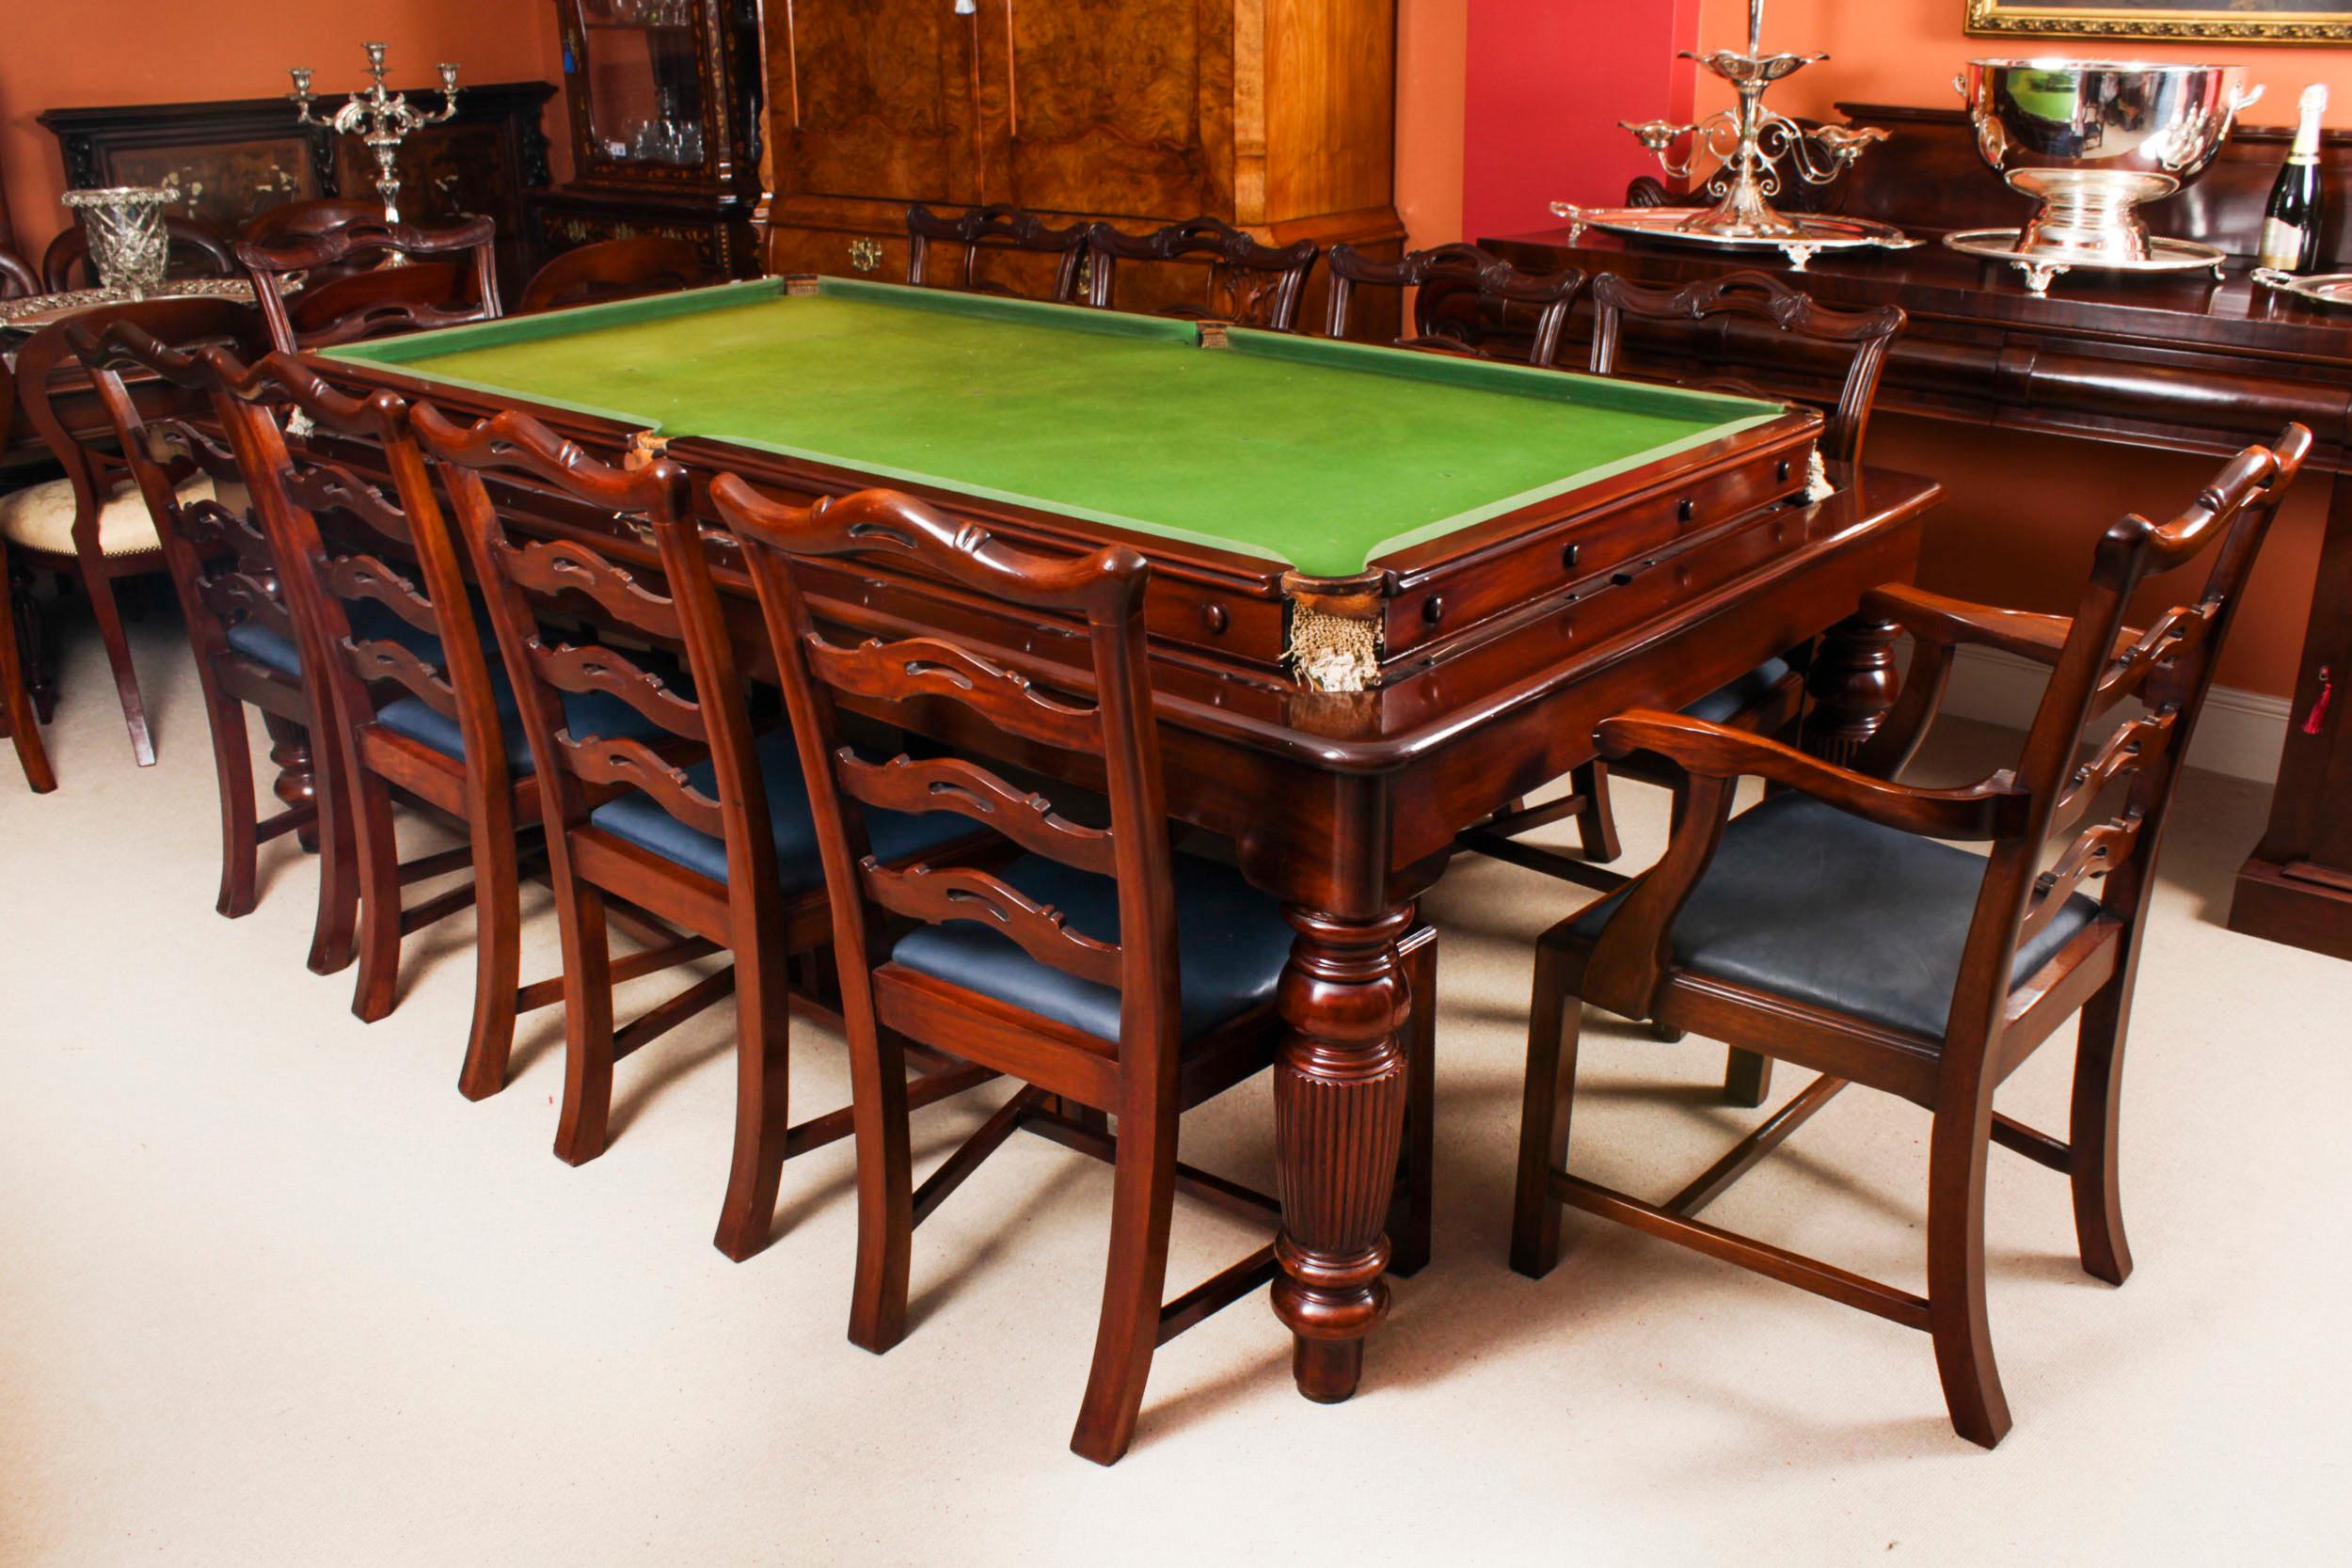 Mahogany Antique 7ft Victorian Rollover Snooker / Dining Table and Chairs 19th Century